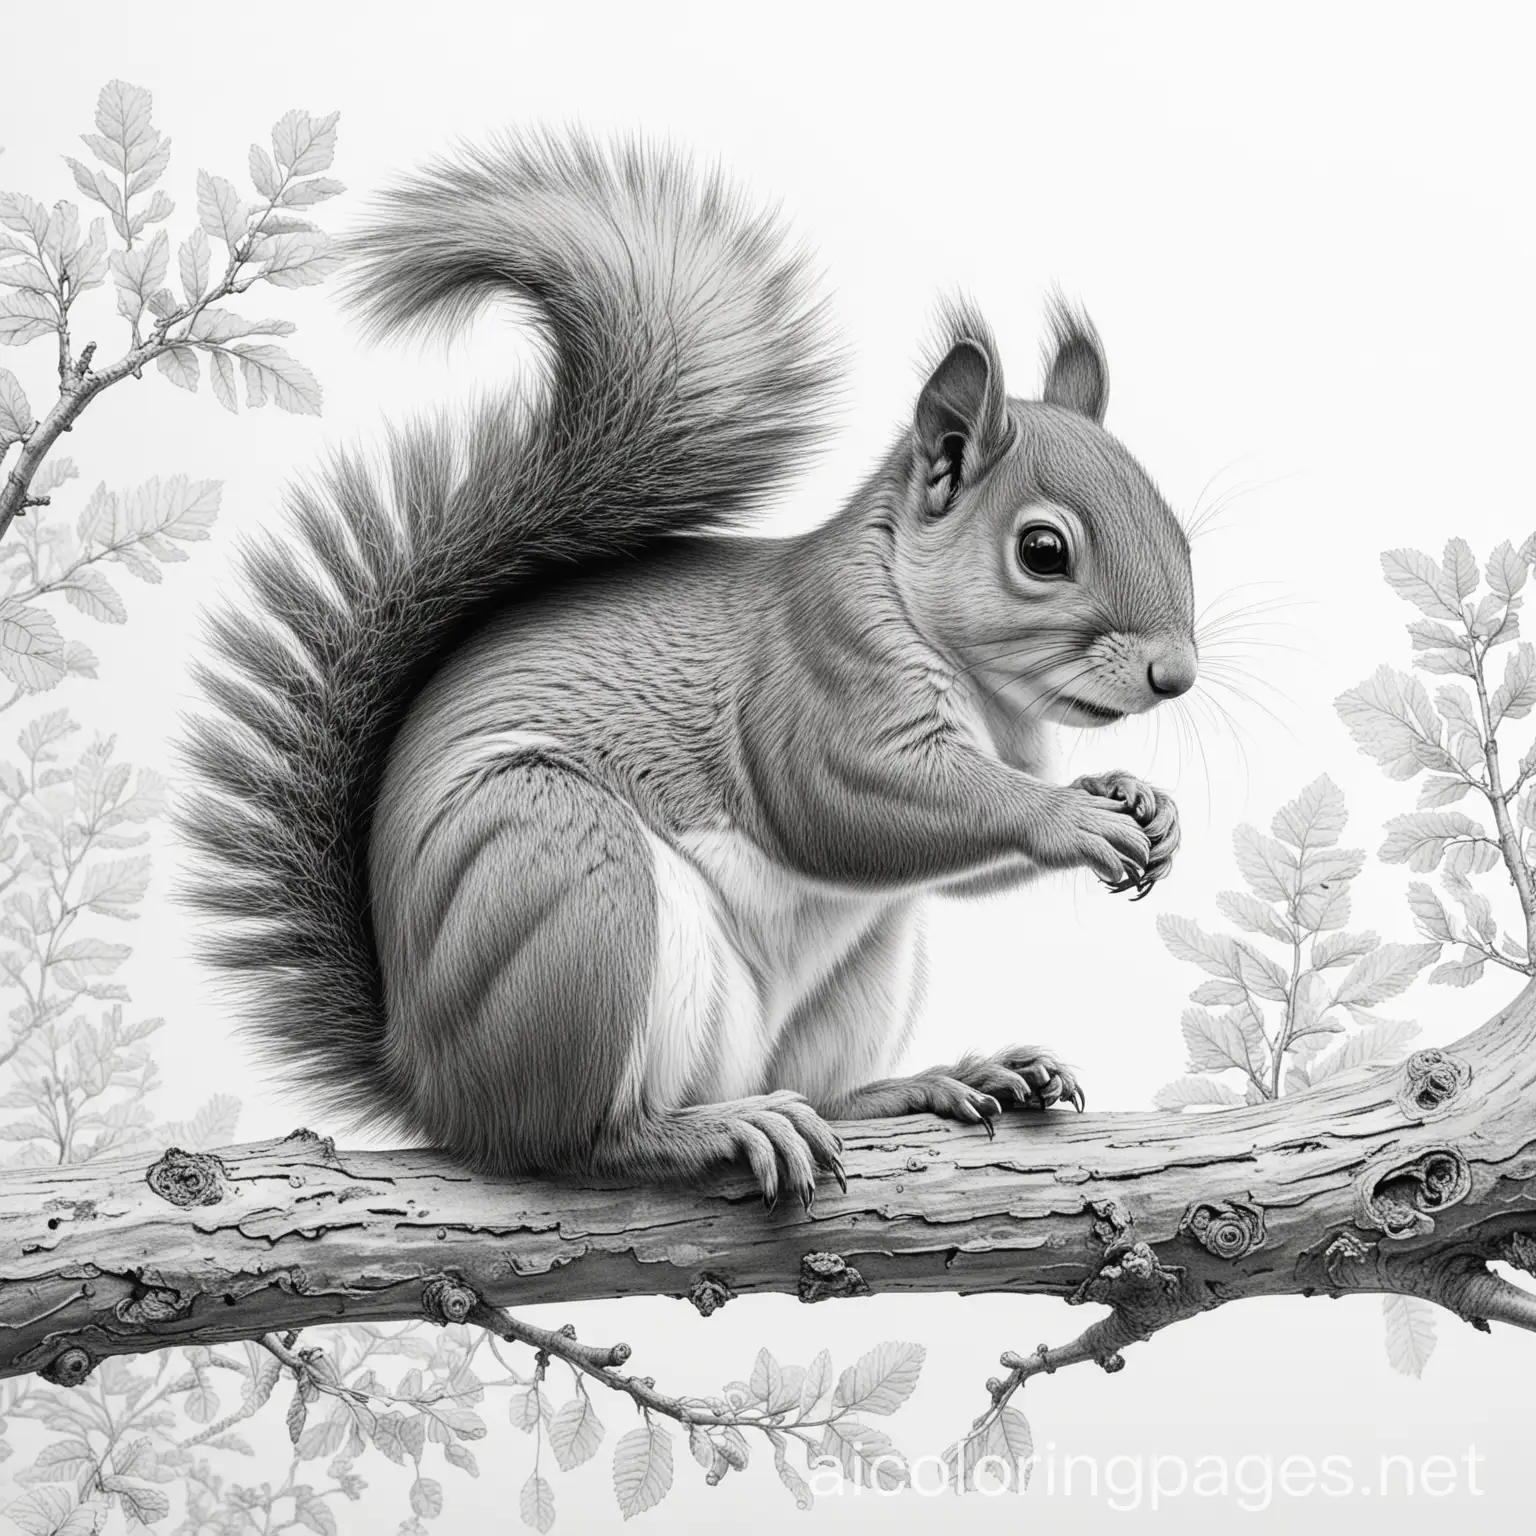 curious squirrel balancing on a branch coloring page for adults, Coloring Page, black and white, line art, white background, Simplicity, Ample White Space. The background of the coloring page is plain white to make it easy for young children to color within the lines. The outlines of all the subjects are easy to distinguish, making it simple for kids to color without too much difficulty